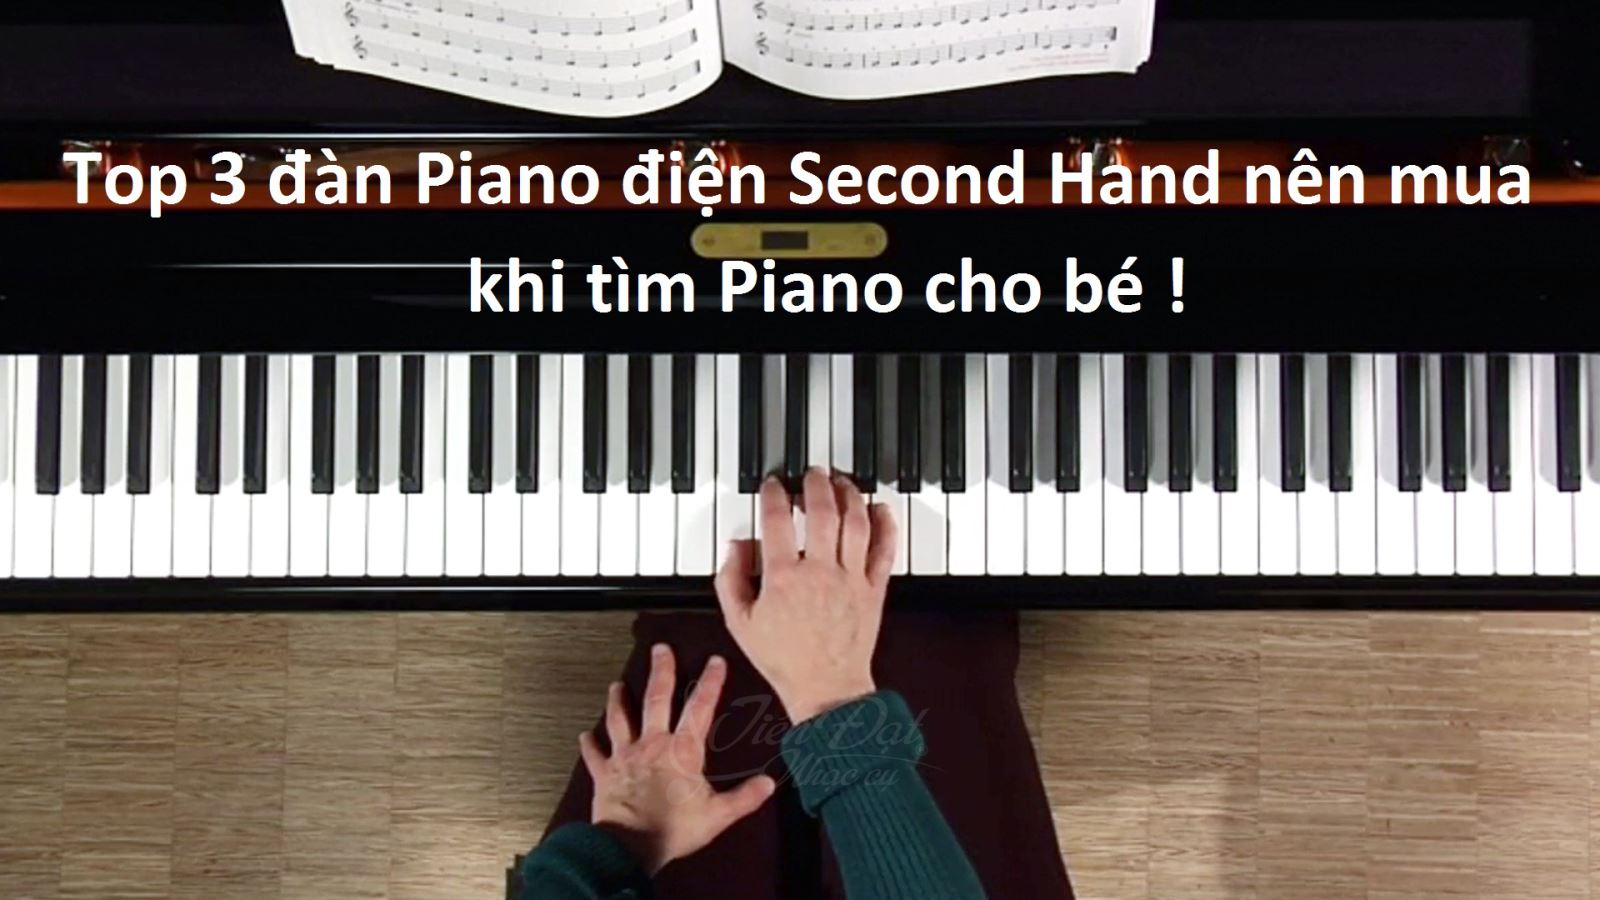 top 3 piano dien secondhand cho be, piano dien gia re